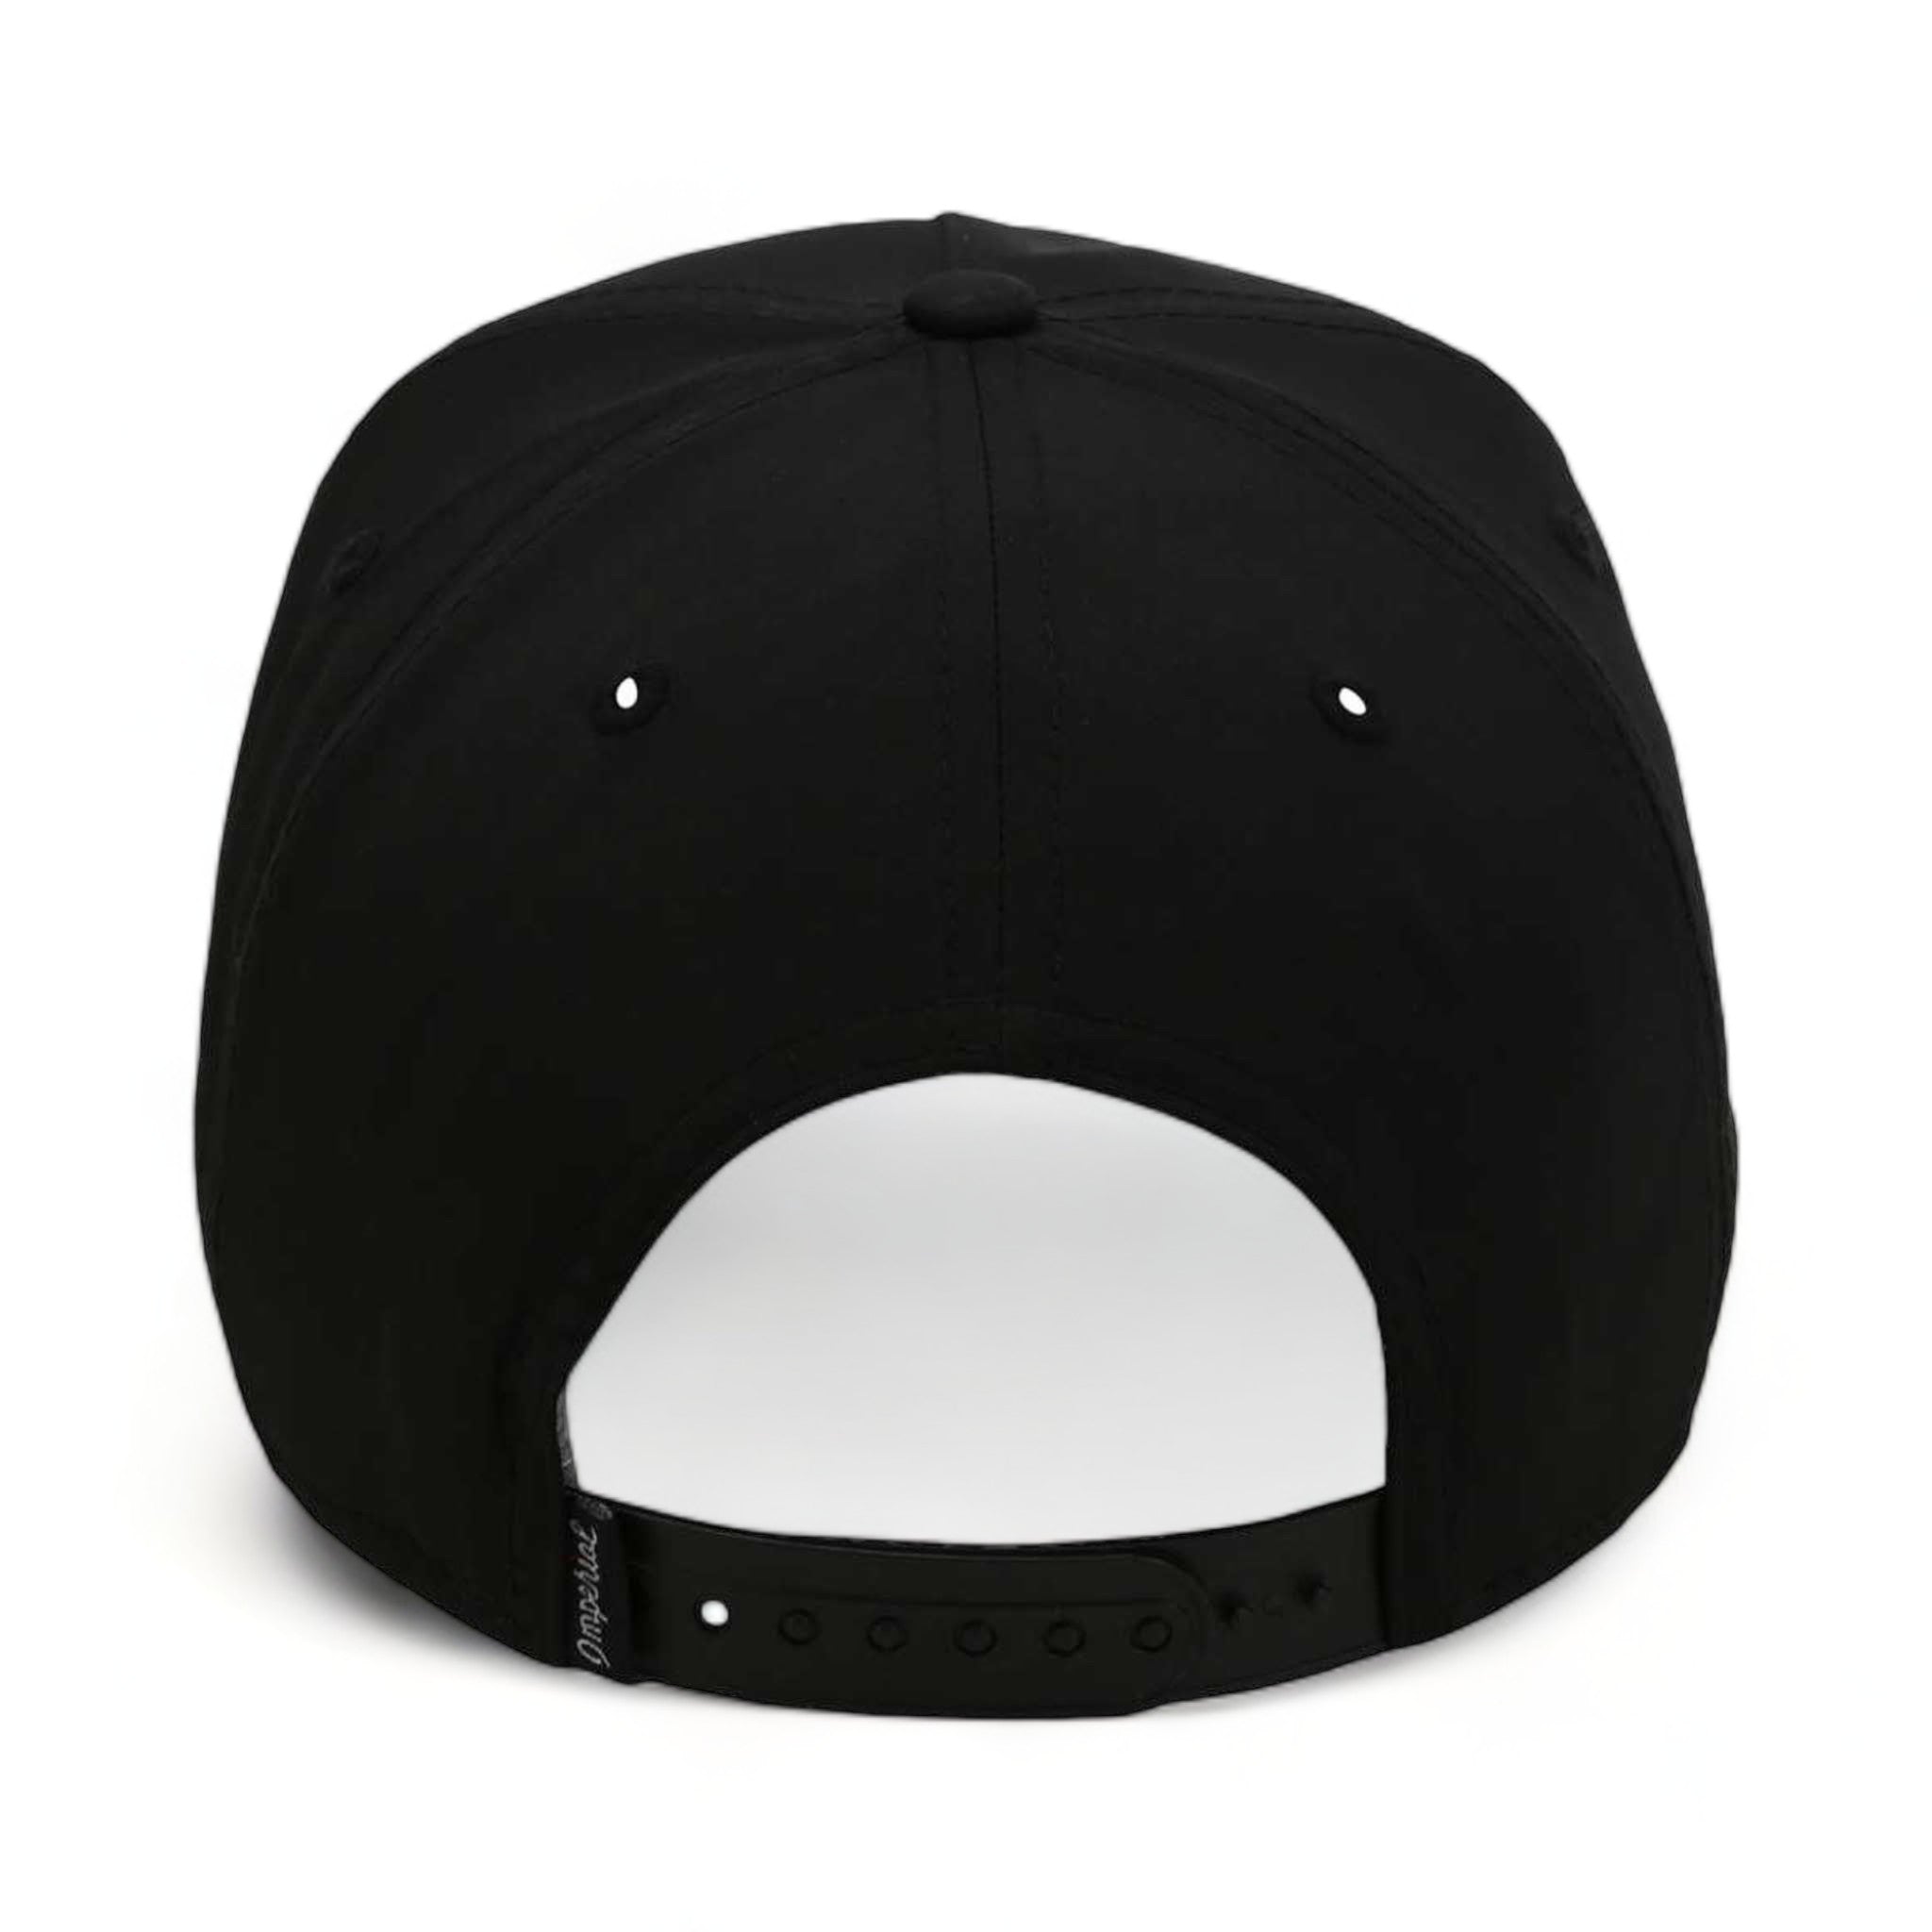 Back view of Imperial 5054 custom hat in black and white